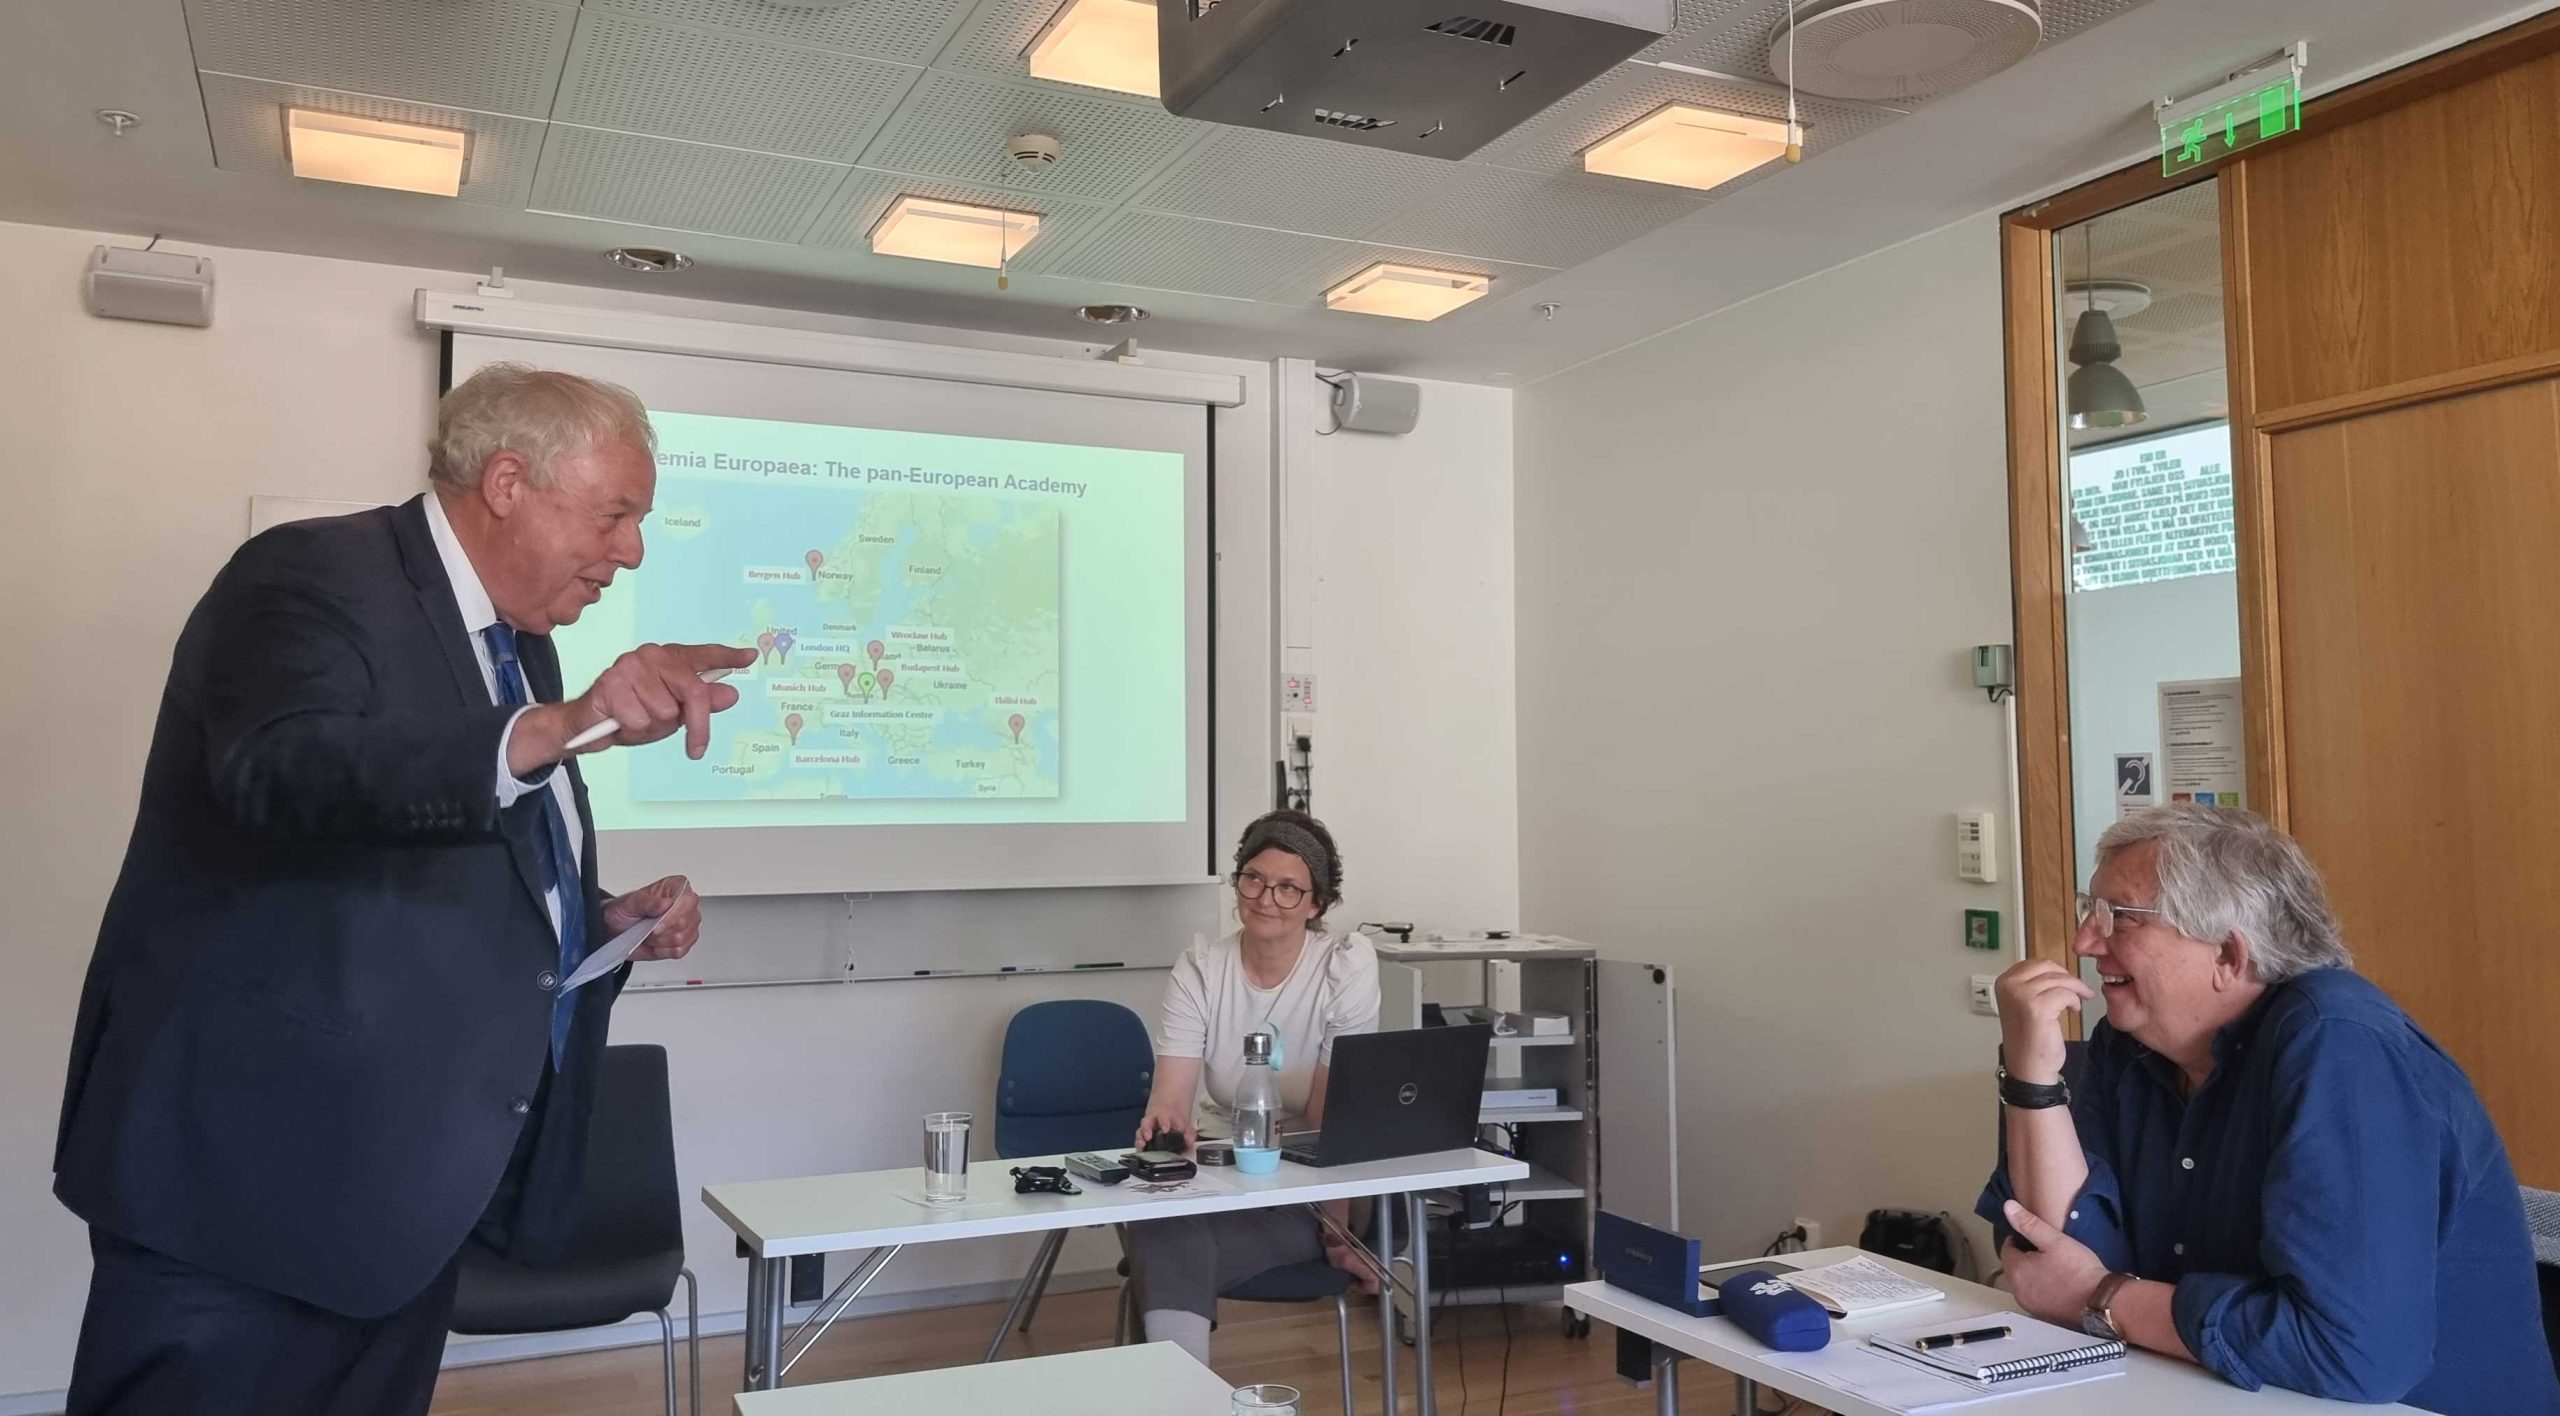 Former president of Academia Europaea, Sierd Cloetingh, on his visit to the University of Bergen. Right: Matthias Kaiser of the Centre for the Study of the Sciences and Humanities (SVT). Centre: AE-Bergen Hub manager Kristin Bakken.